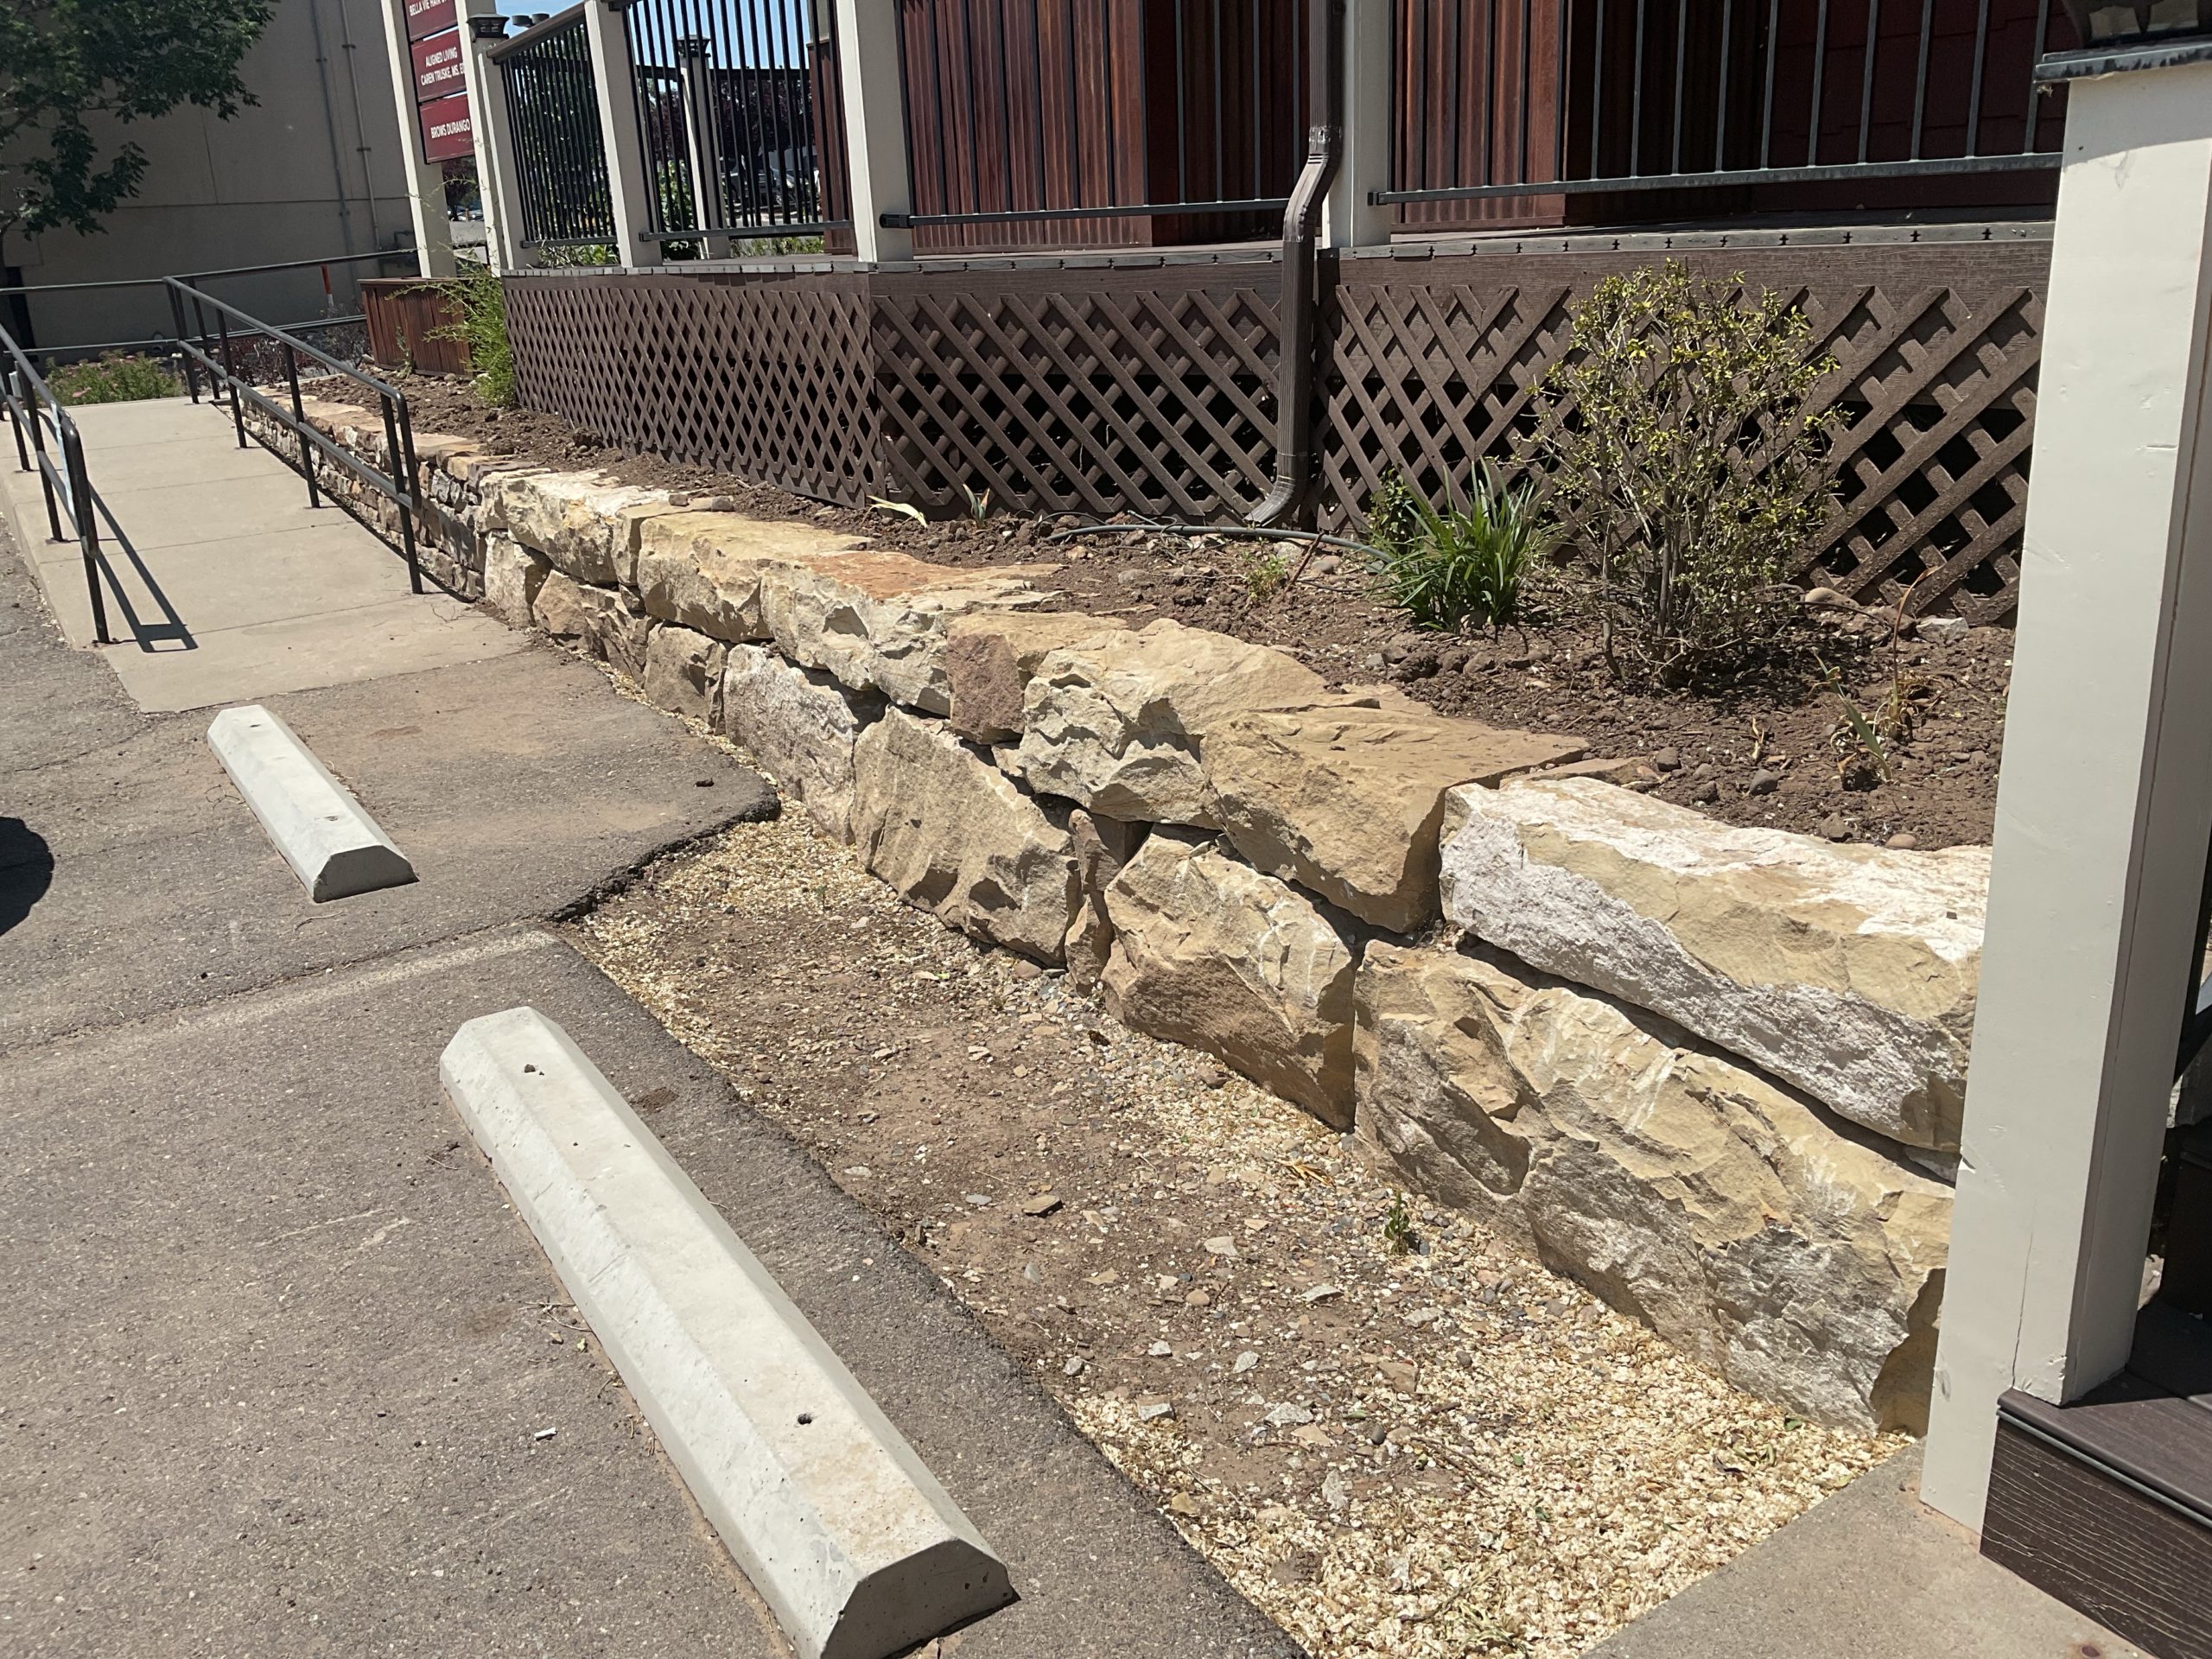 Boulder retaining wall for raised bed planters with a small traditional hand stacked dry stone wall visible